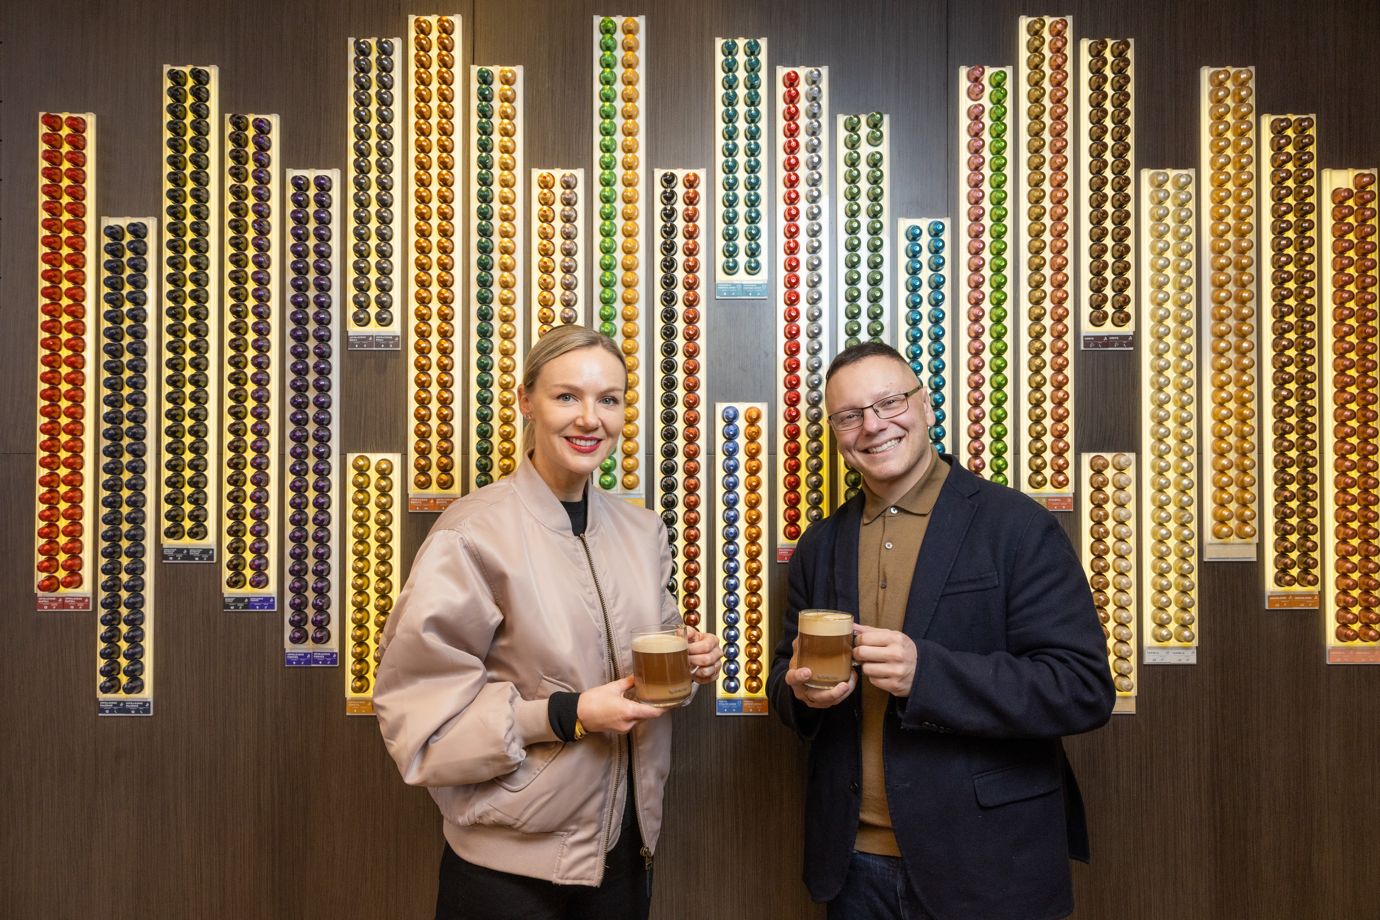 Nespresso partners with Change Please to tackle homelessness in Ireland